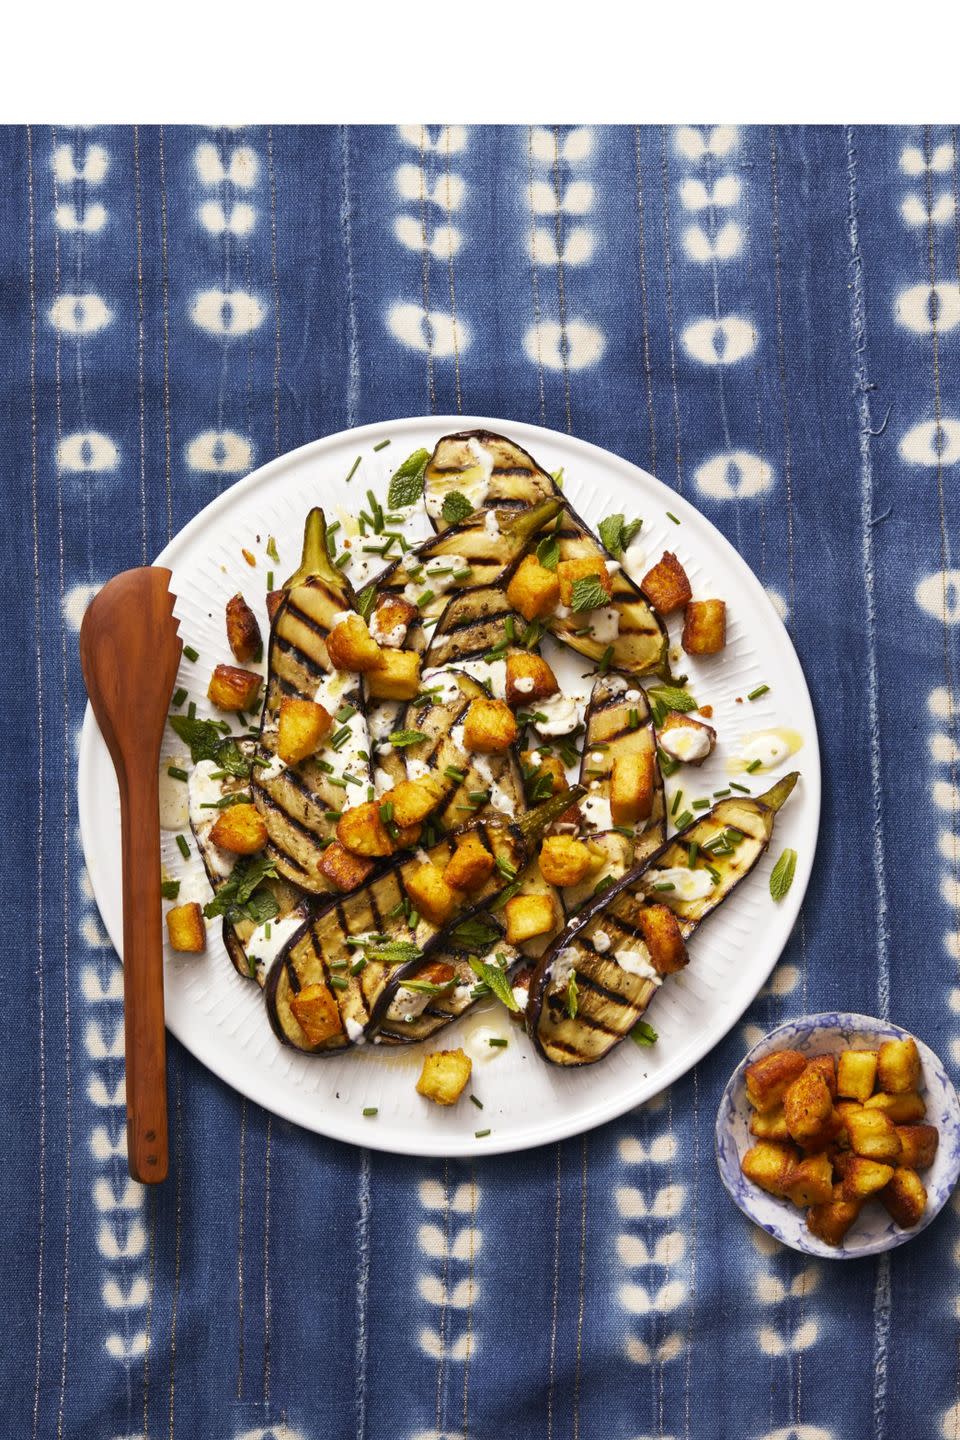 Grilled Eggplant With Chickpea Croutons